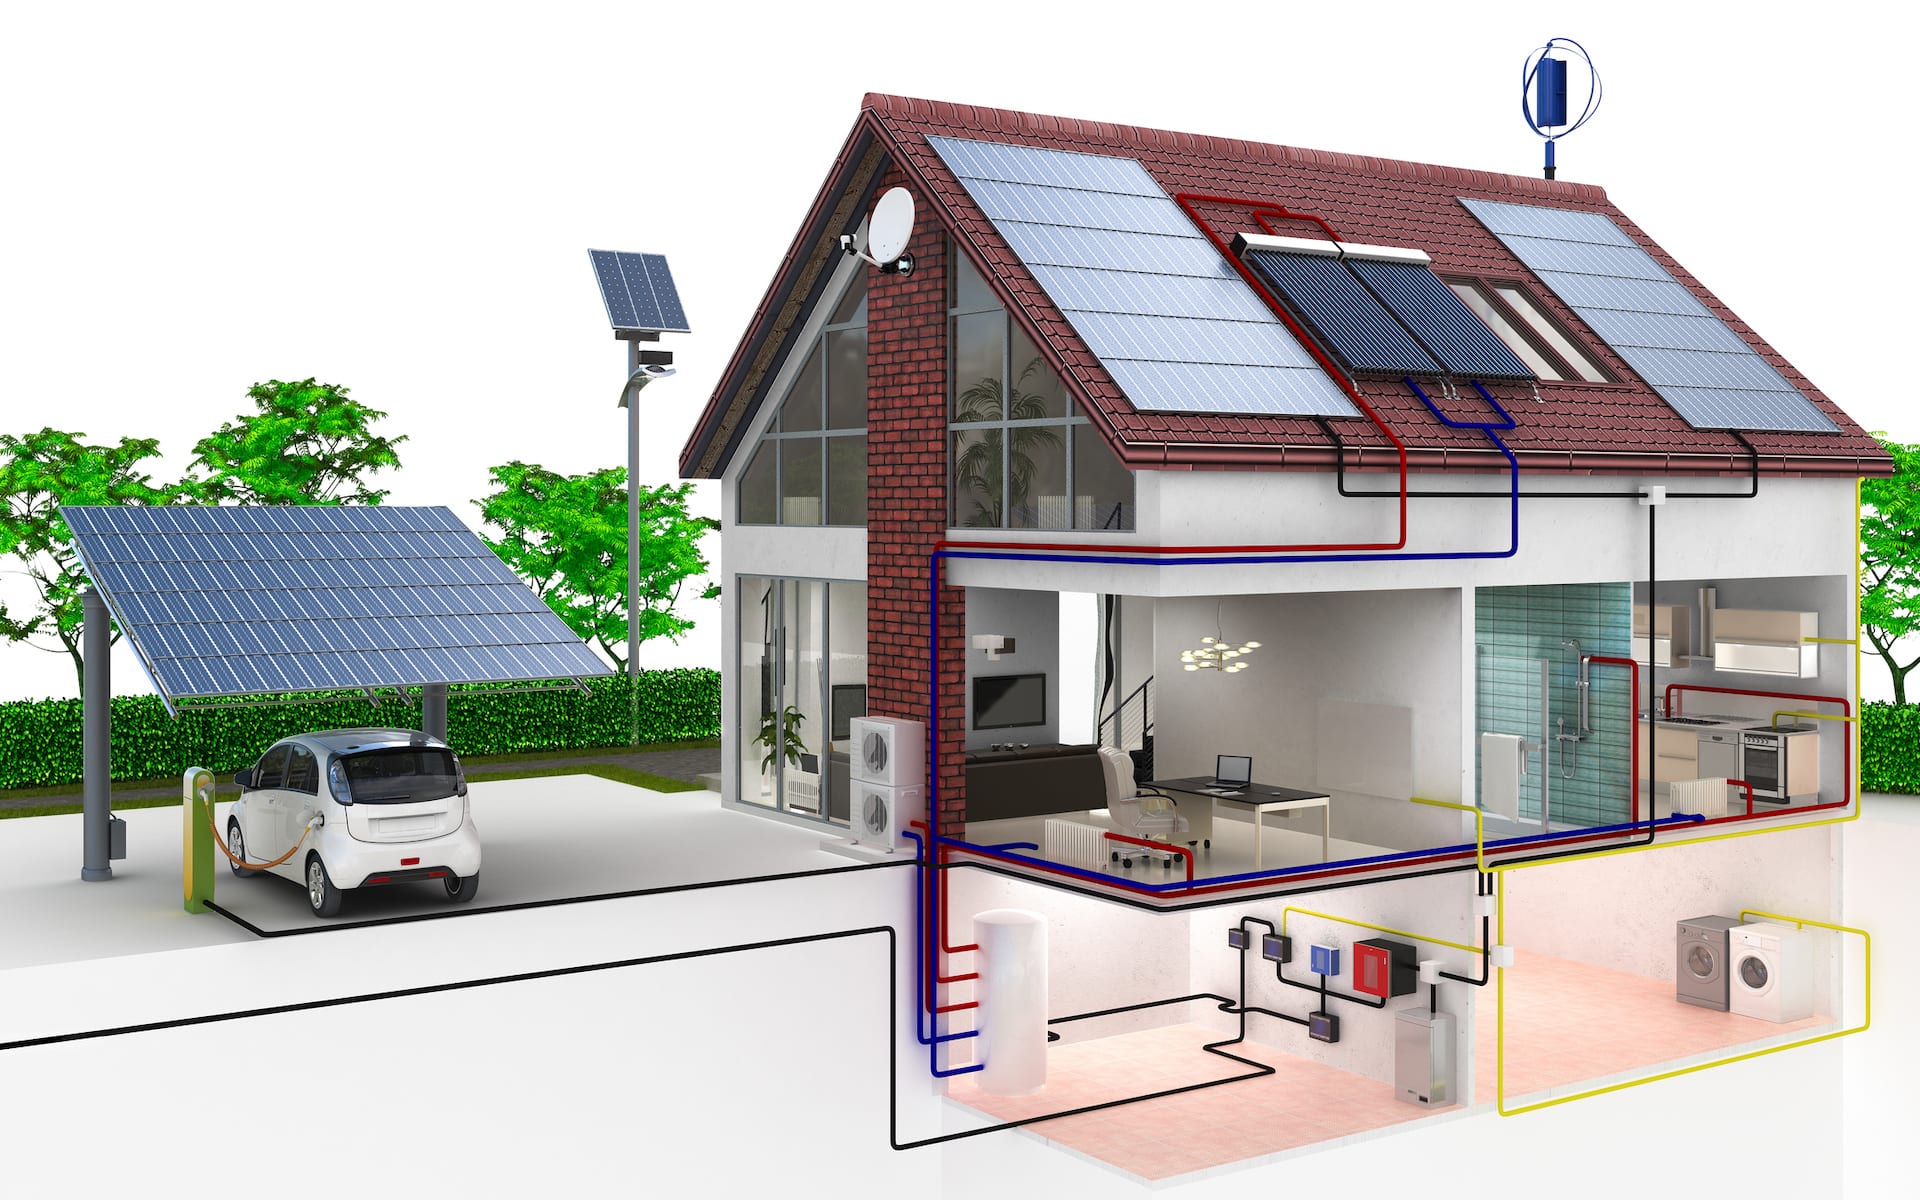 5 Reasons Why Australian Buyers are Prioritizing Energy Efficient Homes